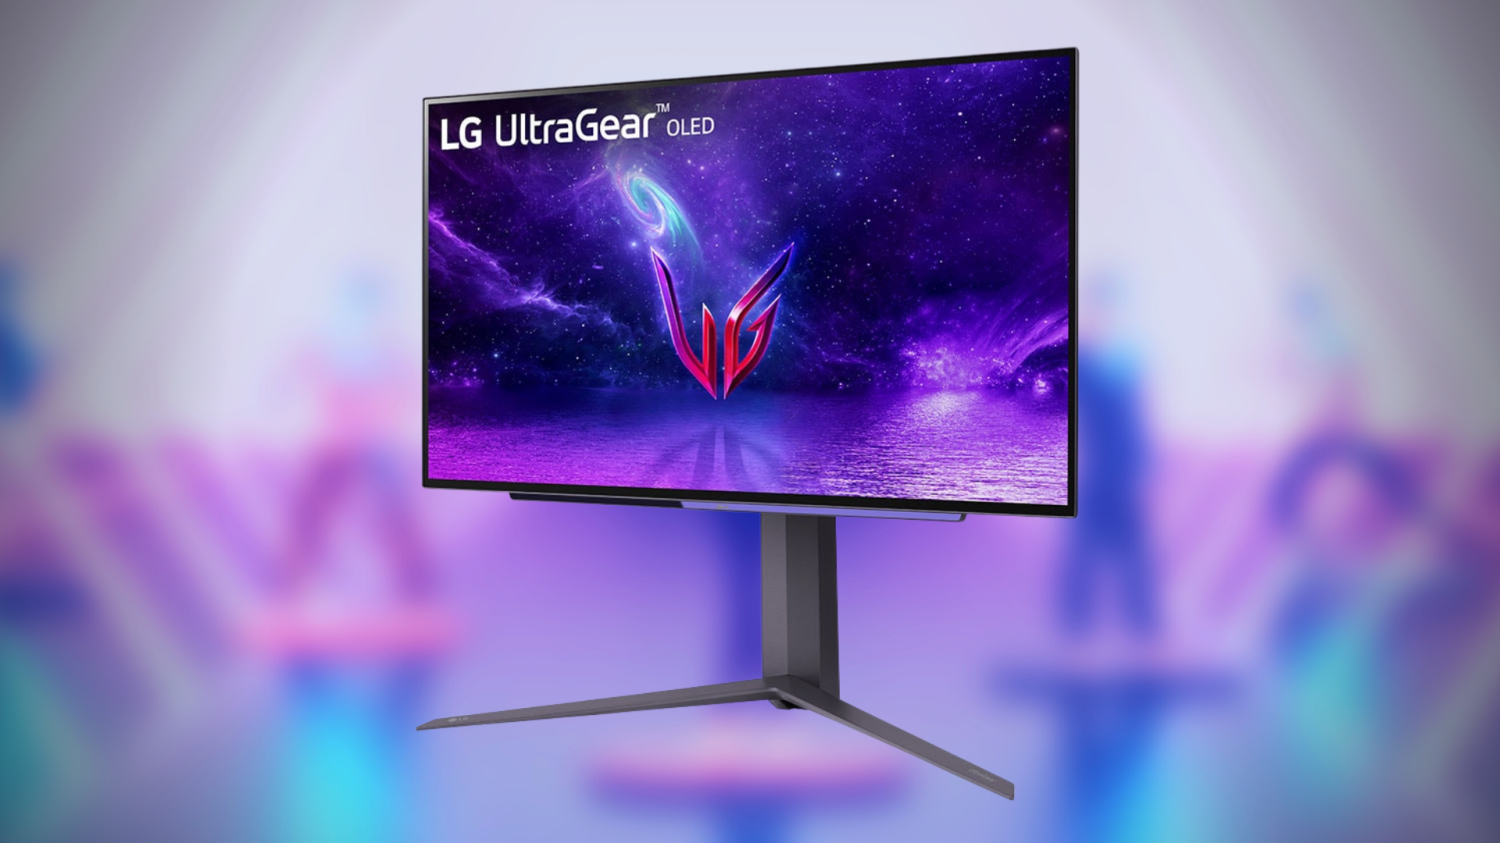 lg-unleashes-27-inch-ultragear-oled-gaming-monitor-1440p-240hz-for-999